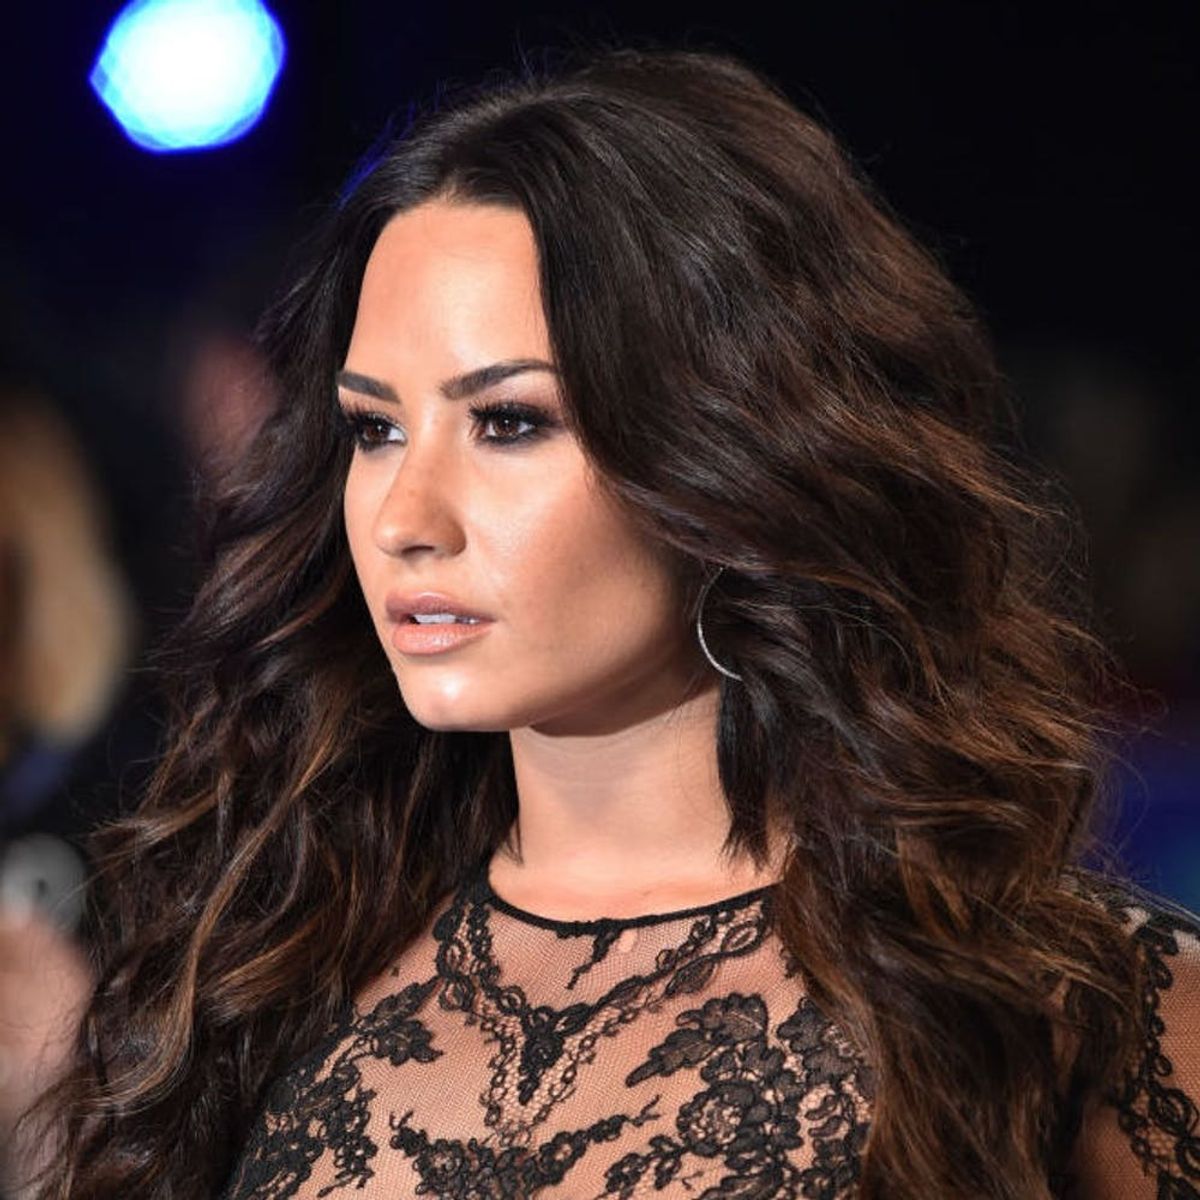 Demi Lovato Used Only Drugstore Products to Create That VMAs Hair